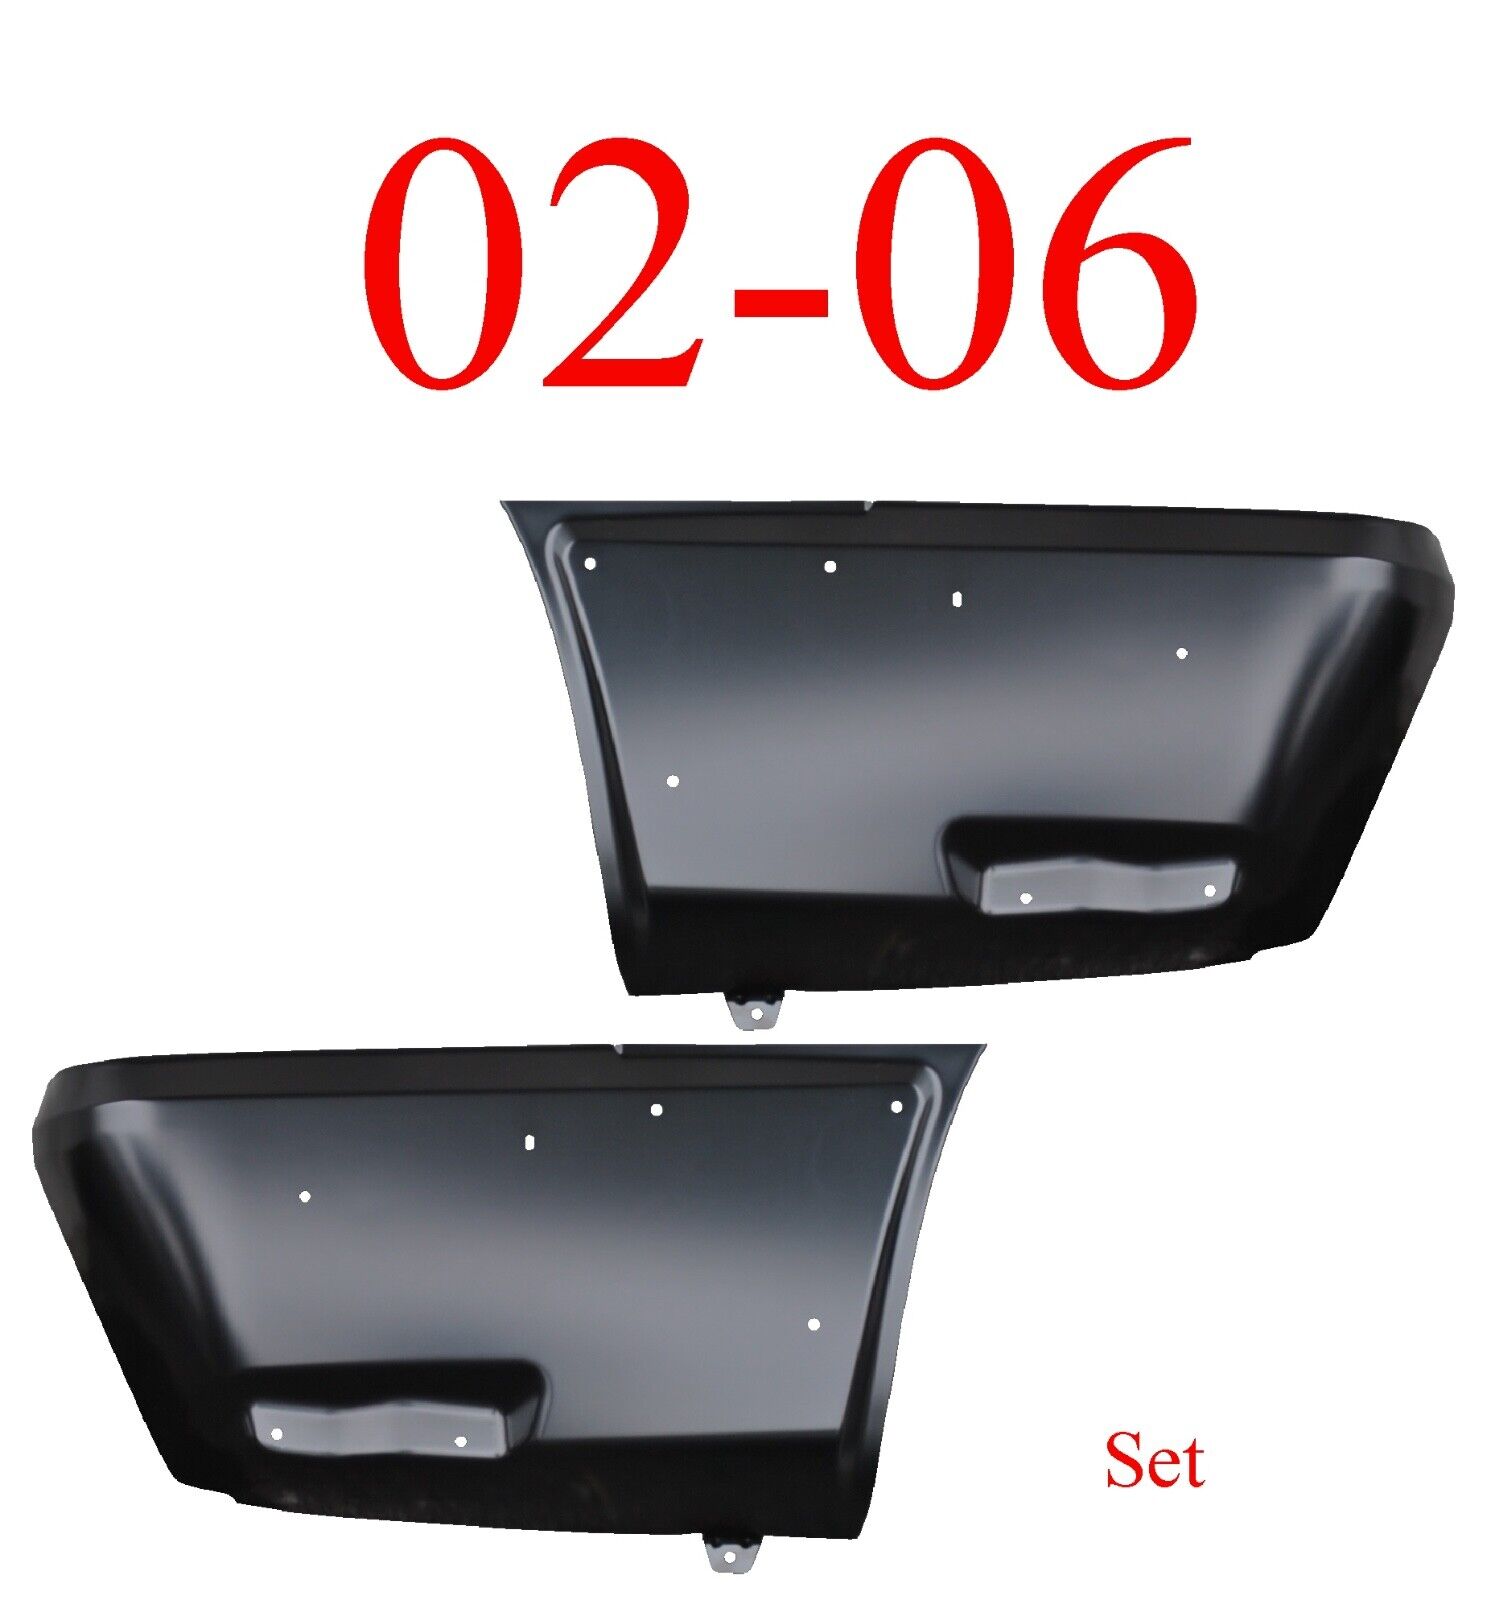 With Cladding 02 06 Set Of Rear Lower Quarter Panels, Chevy Aval